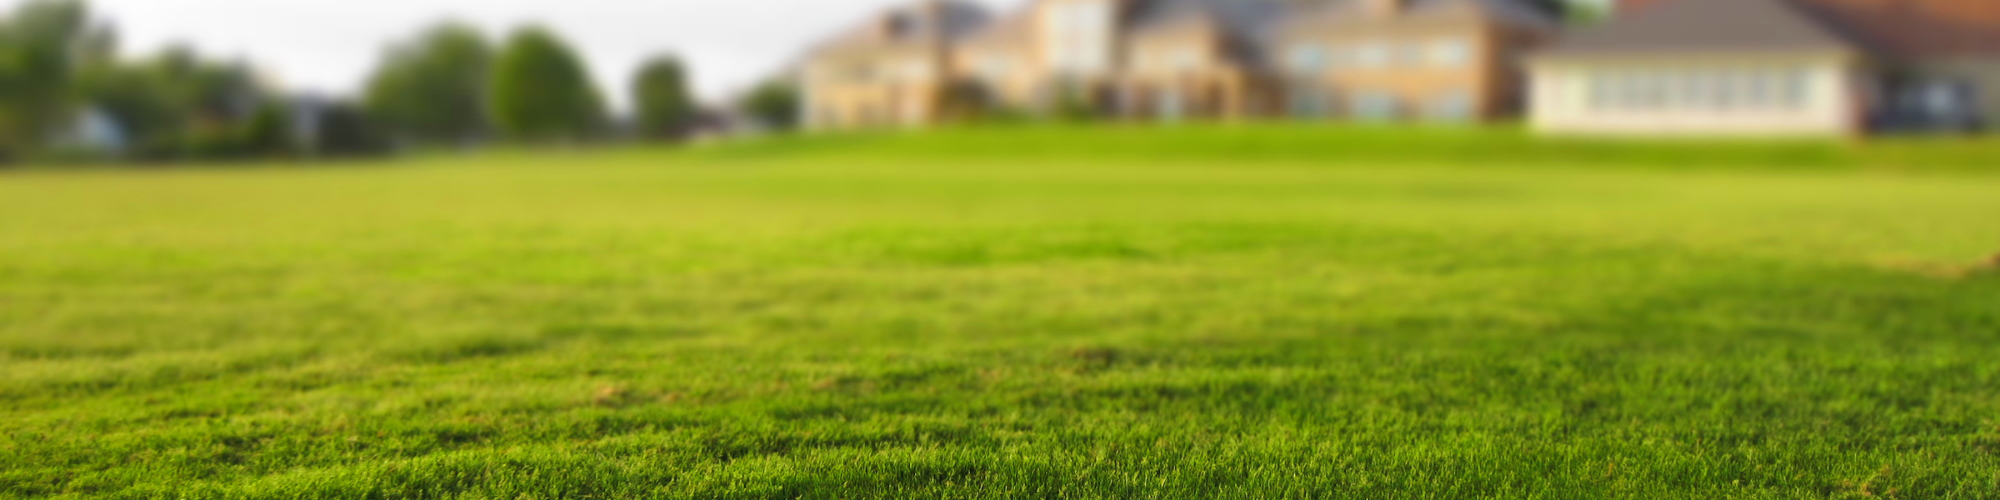 residential lawn with bright green grass